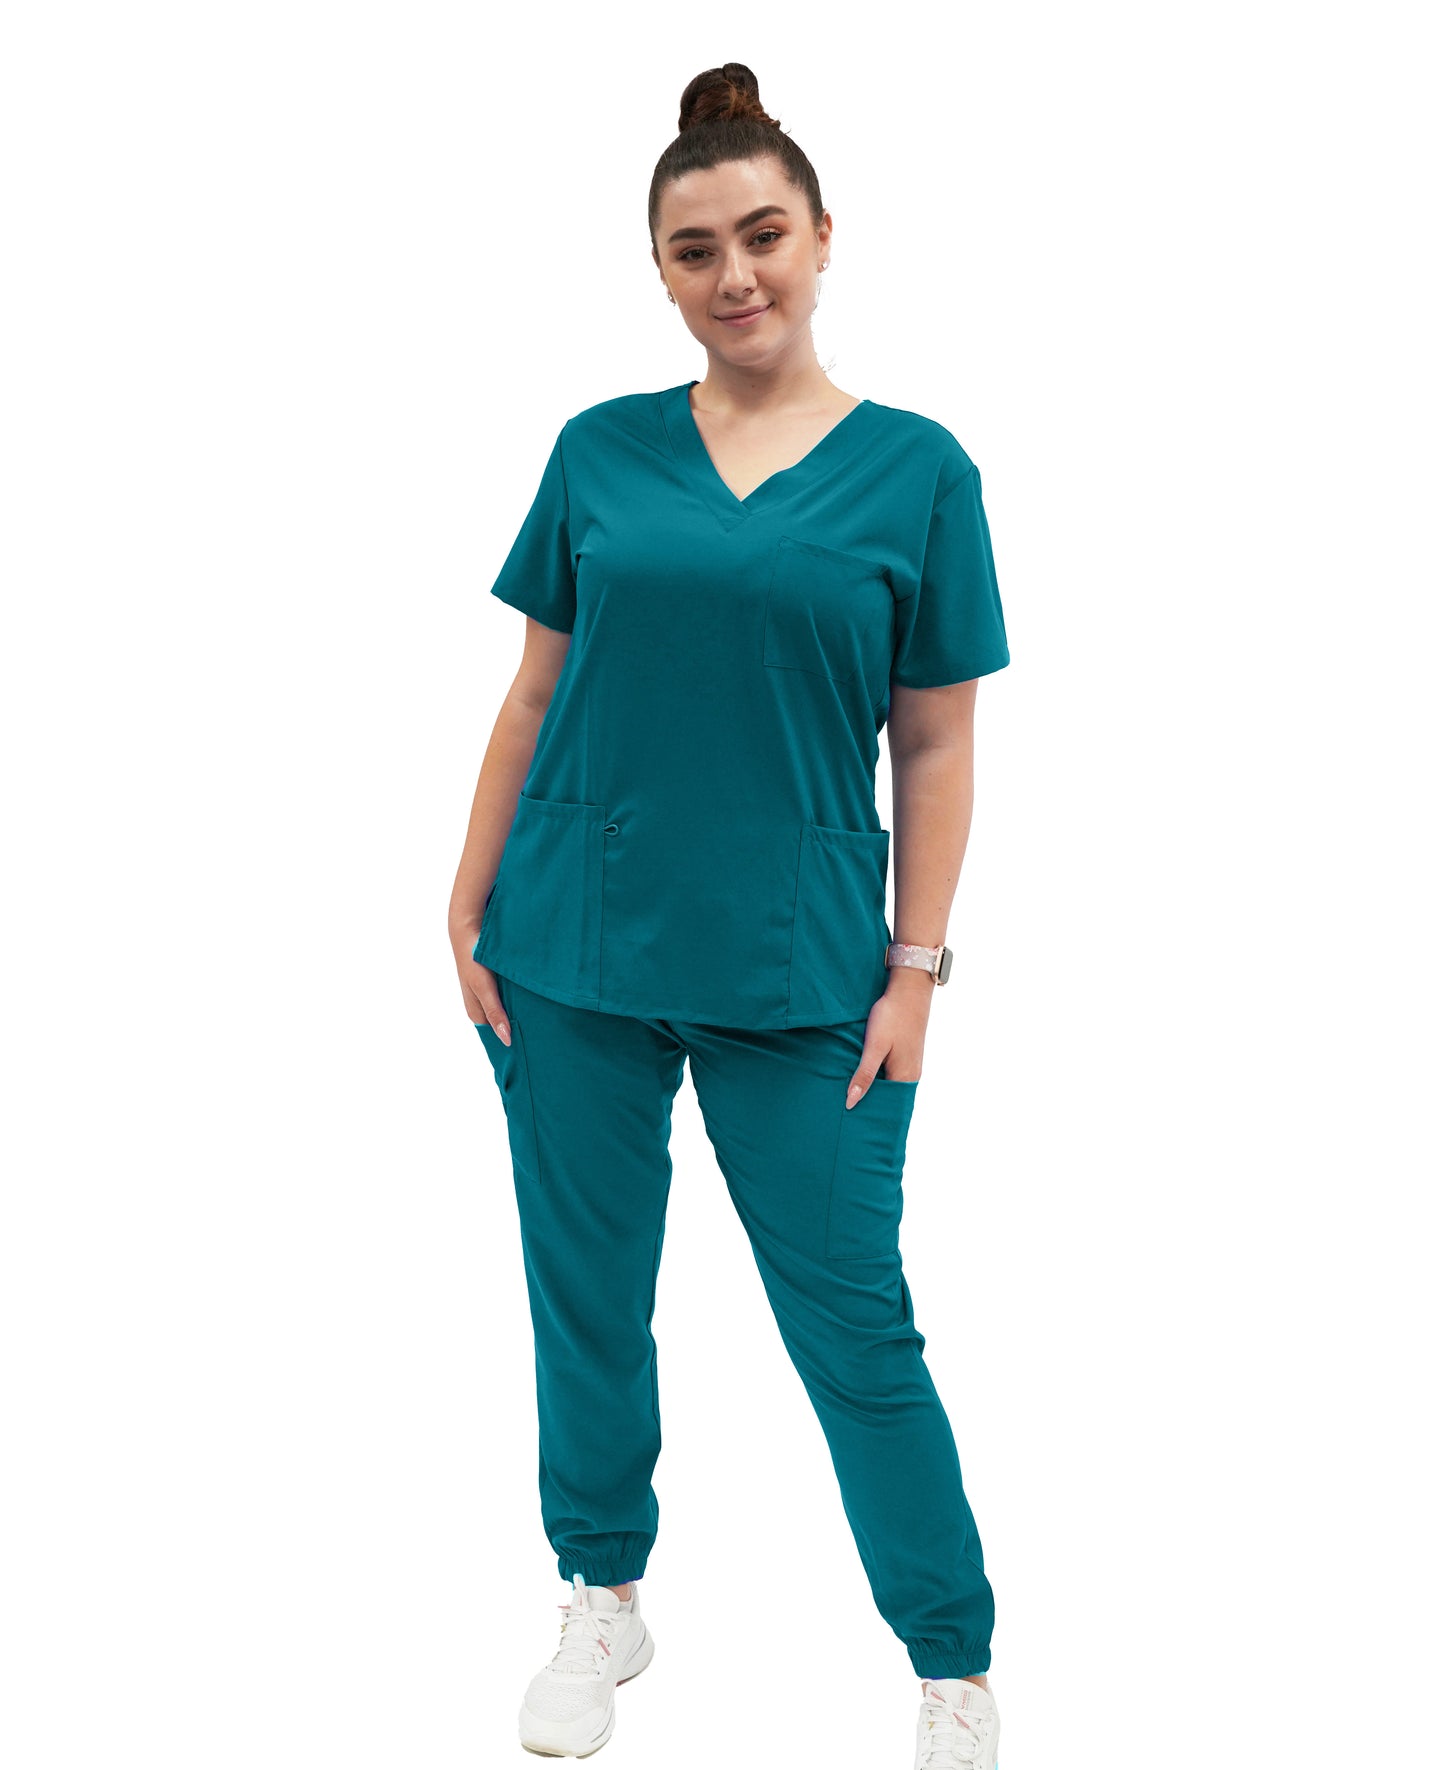 Scrub Set with Jogger Pants - Available in many colors